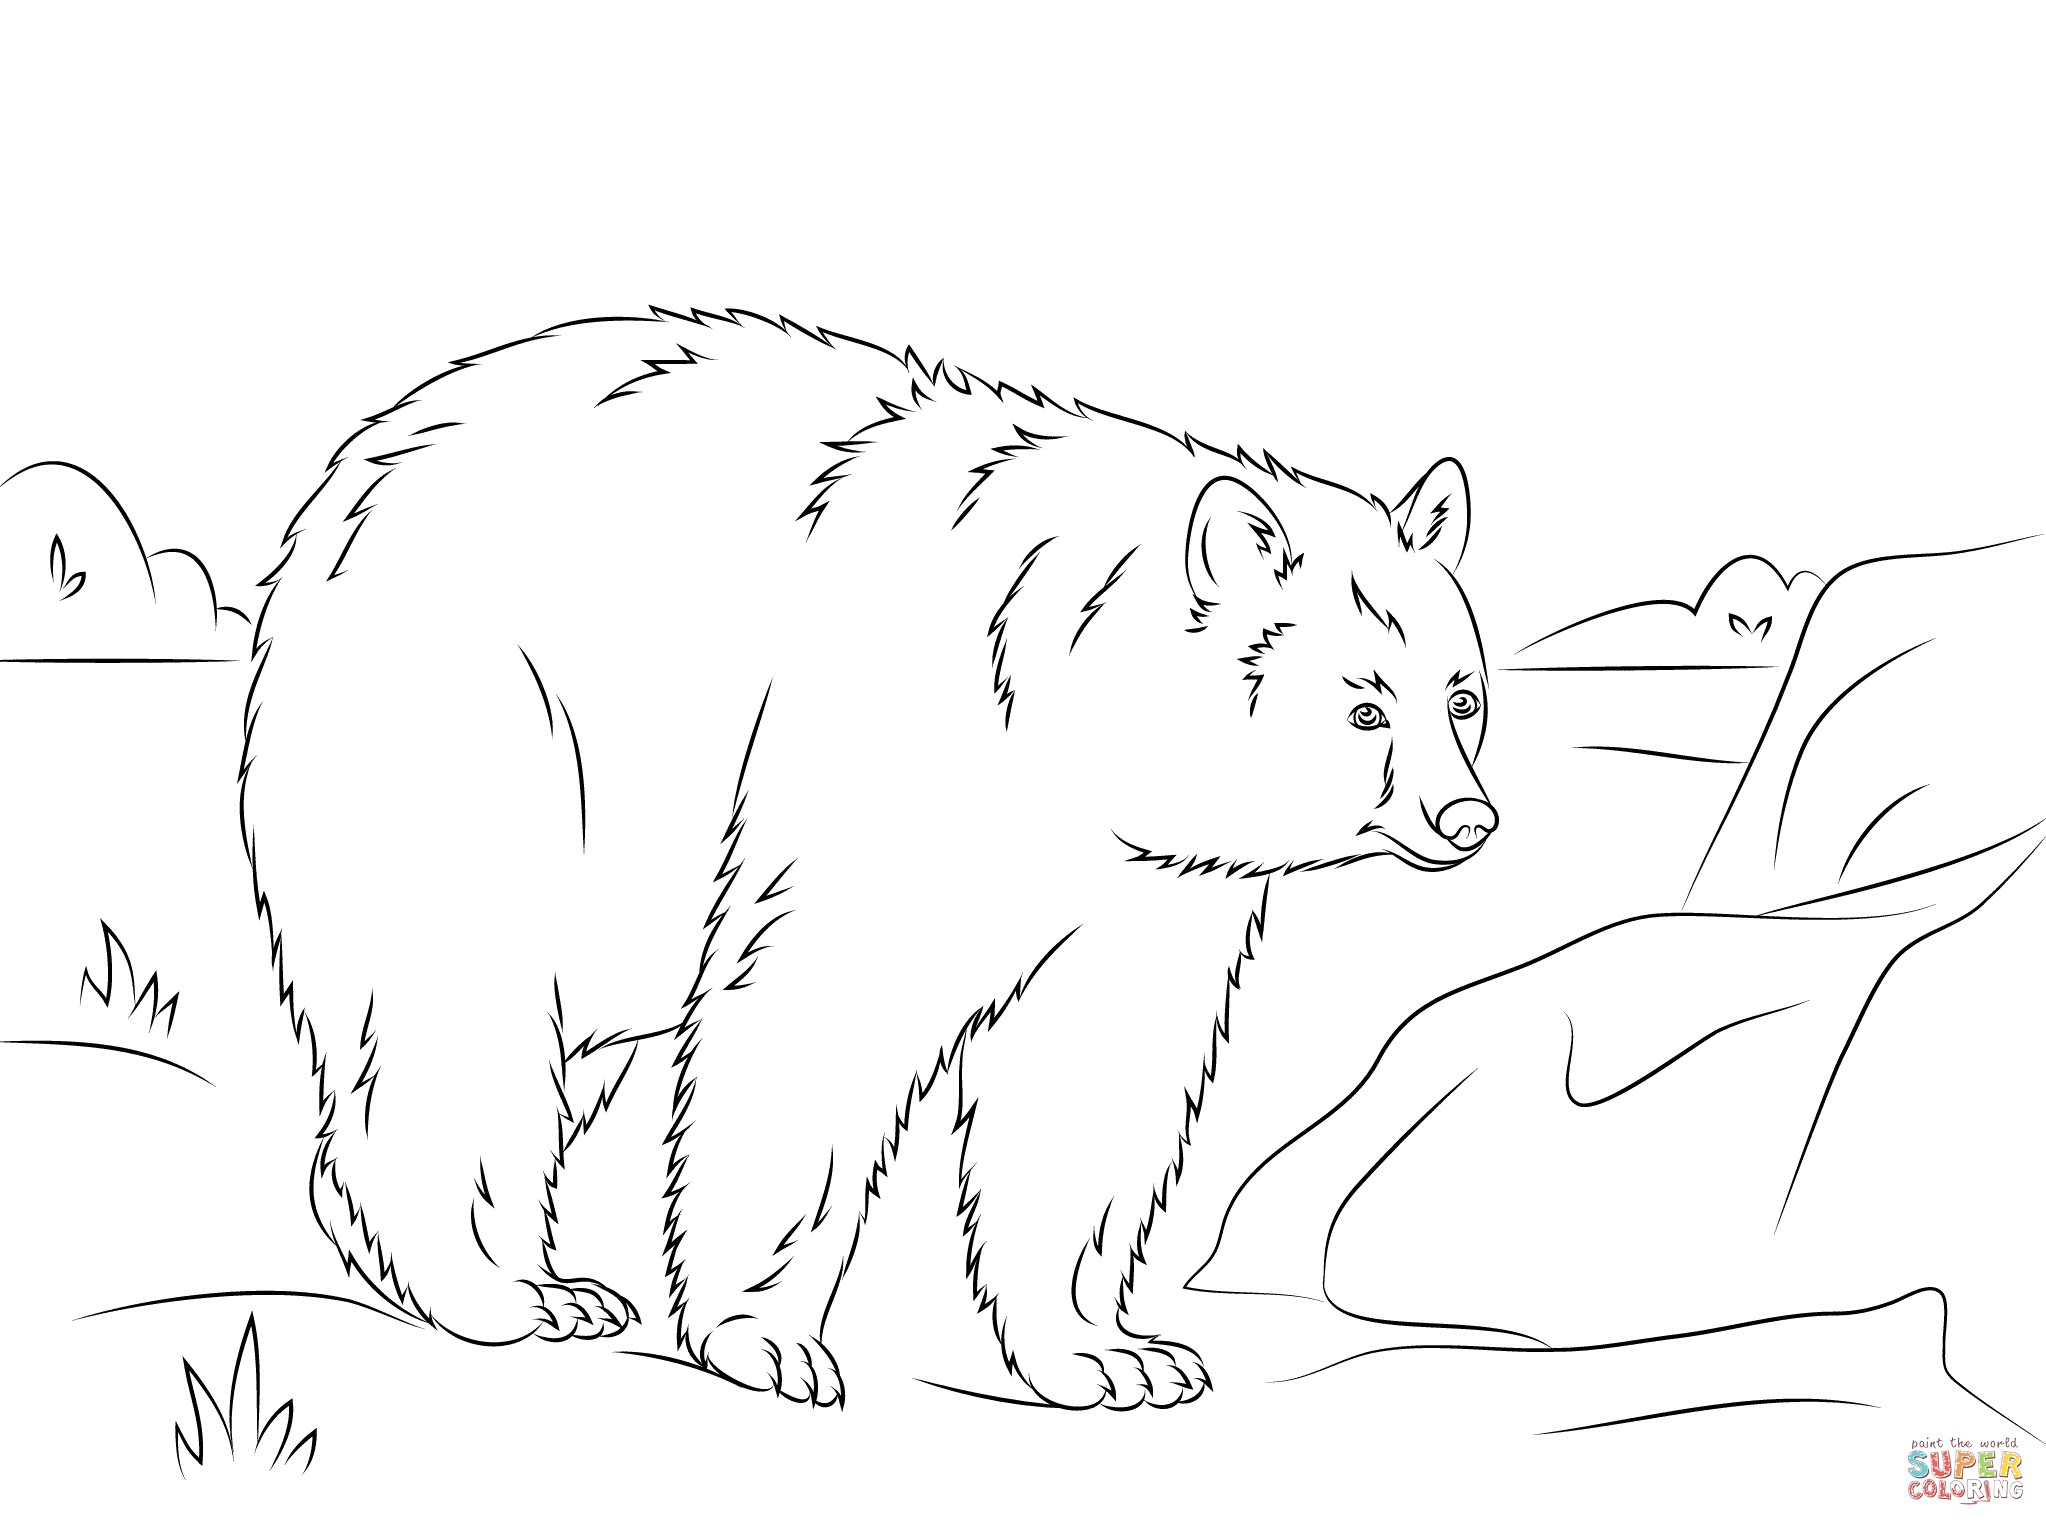 Spectacled Bear coloring #3, Download drawings